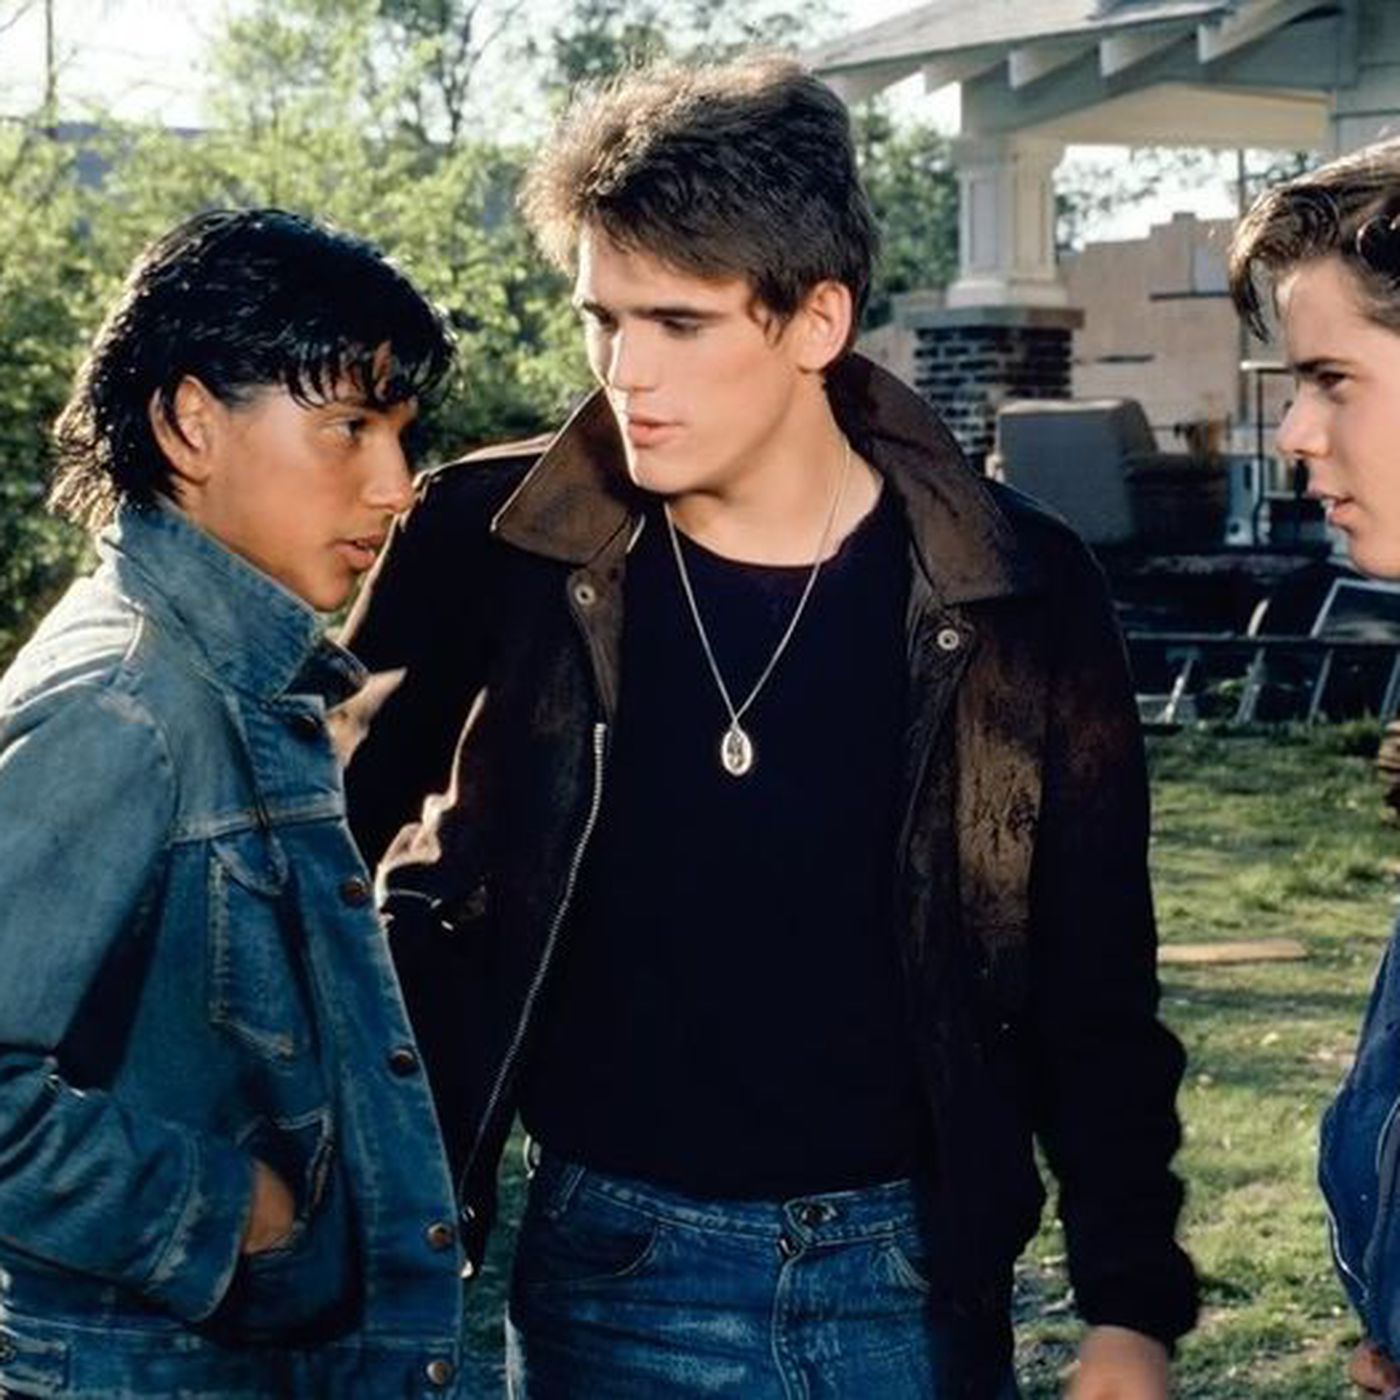 'The Outsiders' is shown in October.